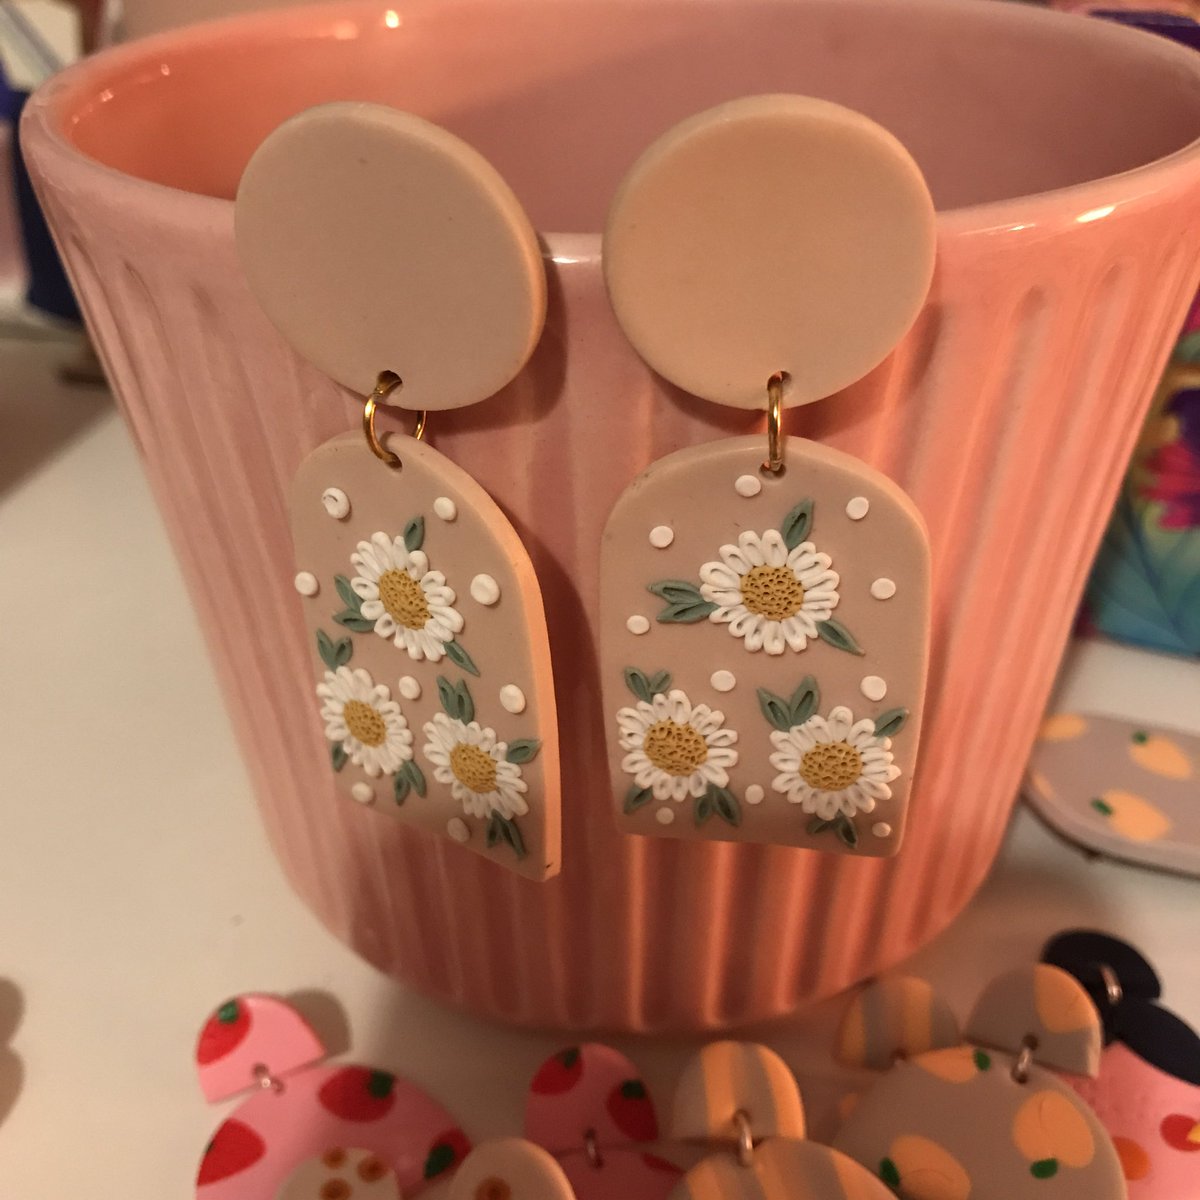 Next up, possibly the most amazingly detailed earrings I own! Little Buddy Studio is a long time favourite, her earrings sell out fast and it isn’t hard to see why! They’re utterly gorgeous and so lightweight as well!  http://littlebuddystudio.com 